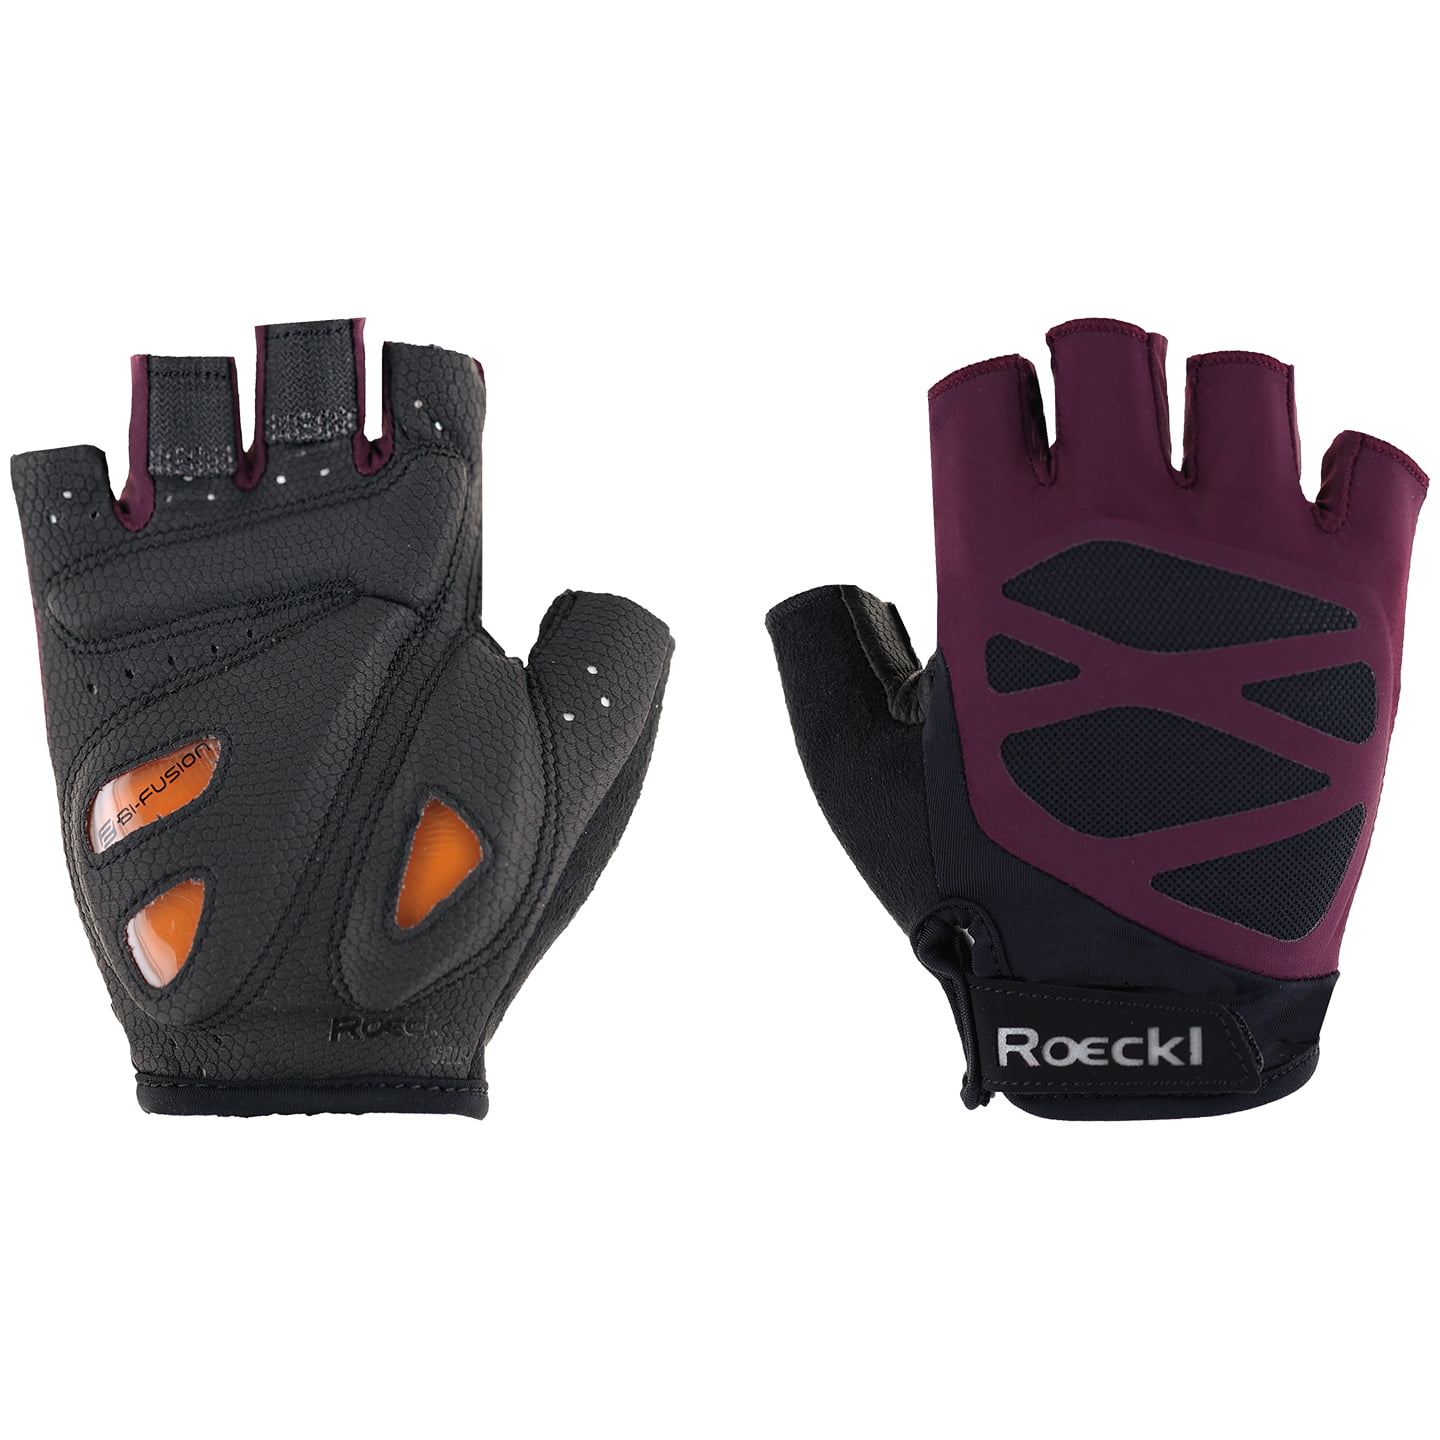 ROECKL Iton Women’s Gloves Women’s Cycling Gloves, size 6,5, Cycling gloves, Cycling clothing